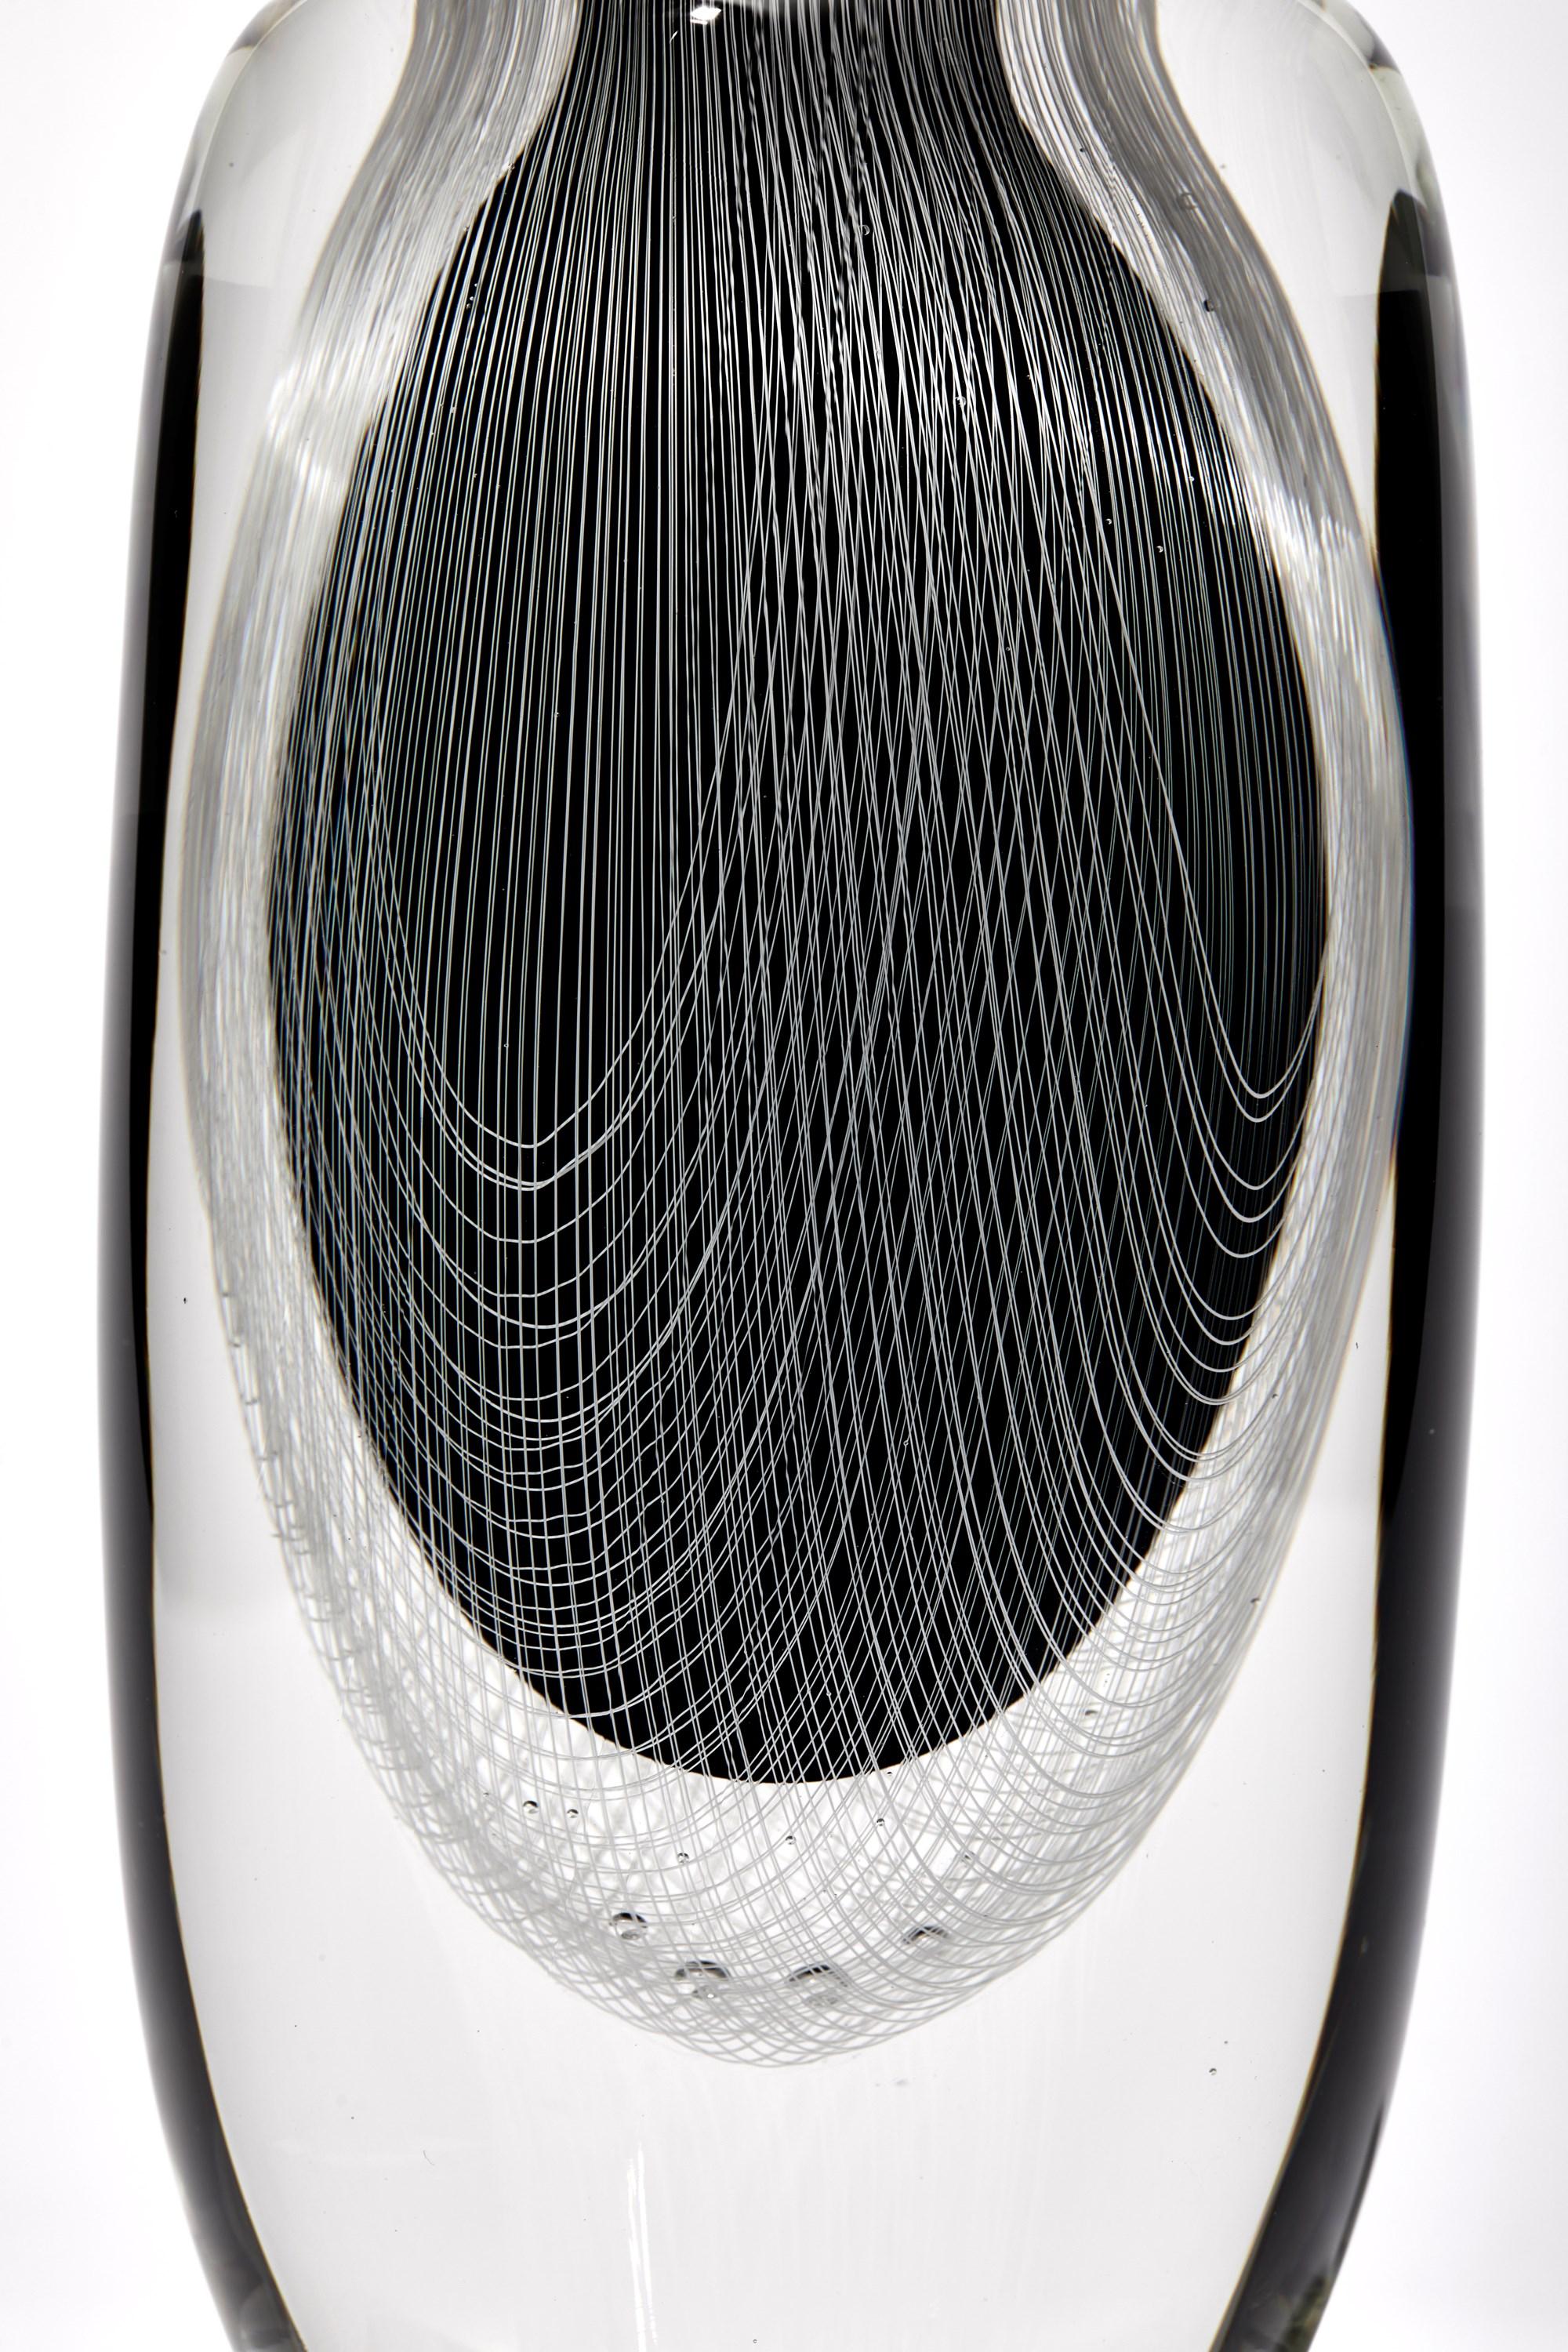 Organic Modern Woven Threads, a Monochrome Large Sculptural Glass Bottle by Peter Bowles